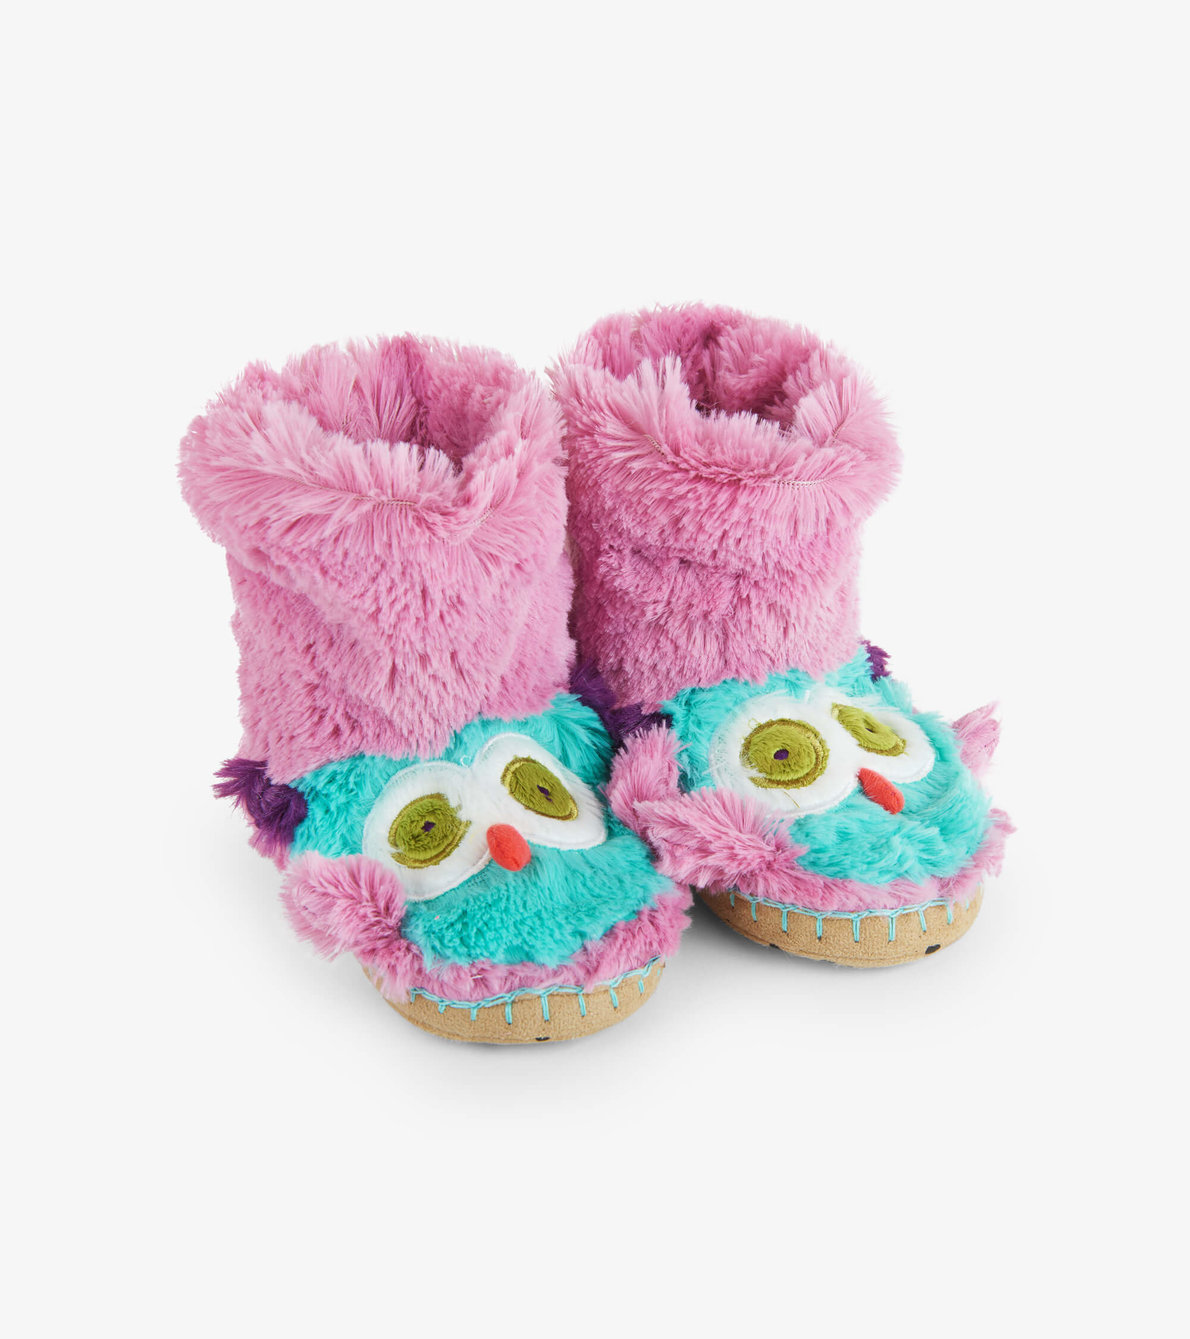 View larger image of Party Owl Kids Fuzzy Slouch Slippers